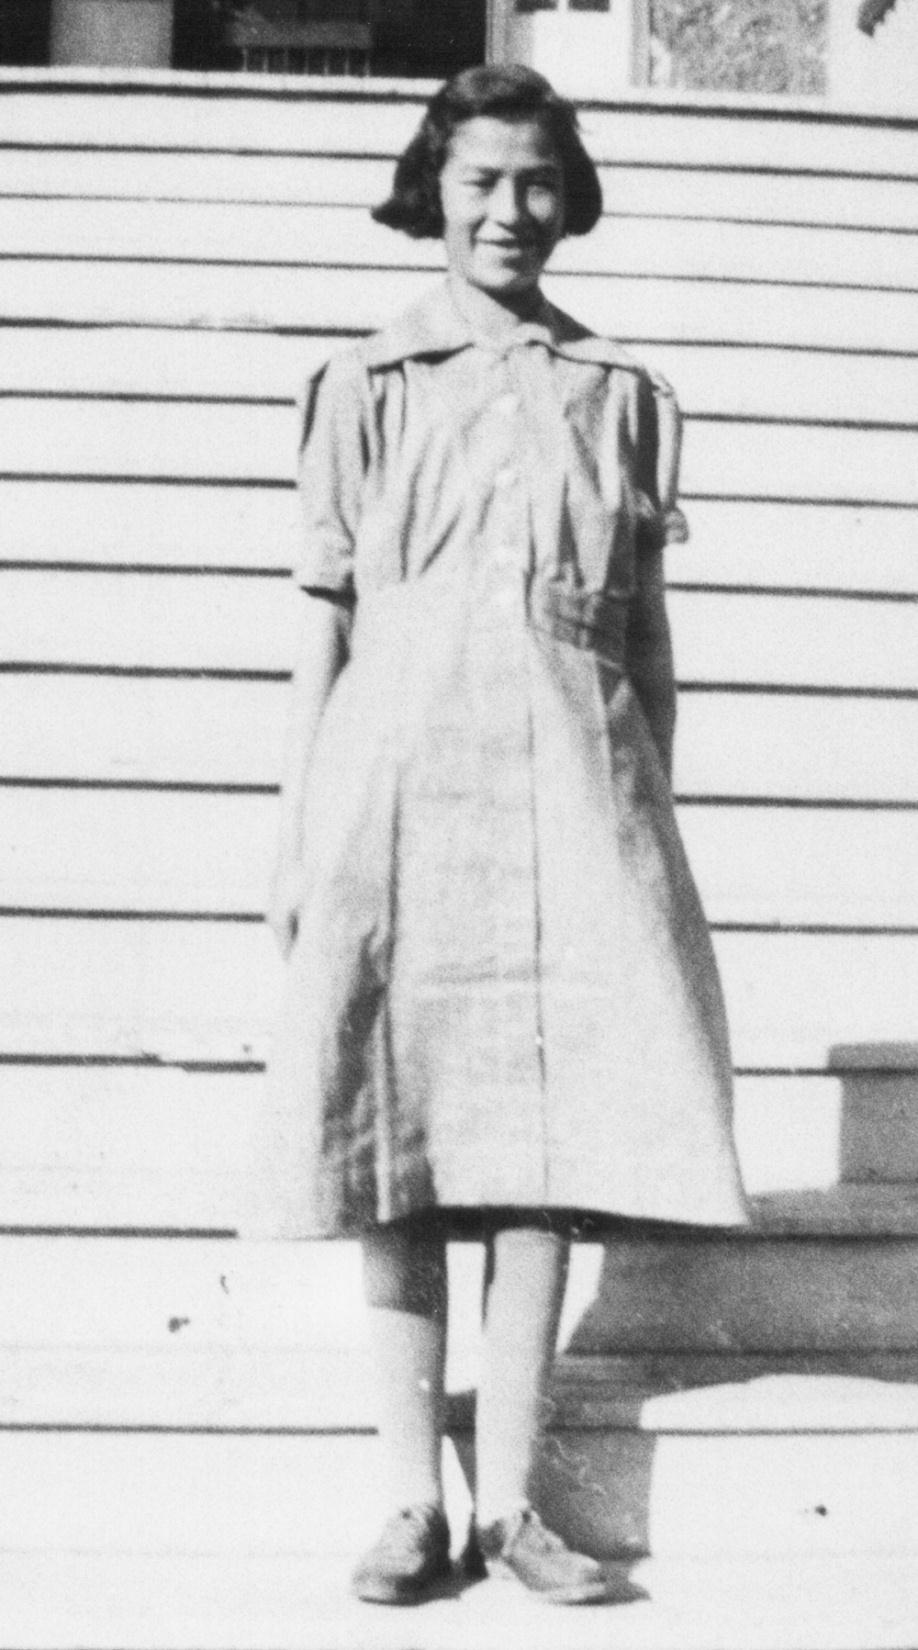 Edith Sealhunter, October 1943 Age 15 years.